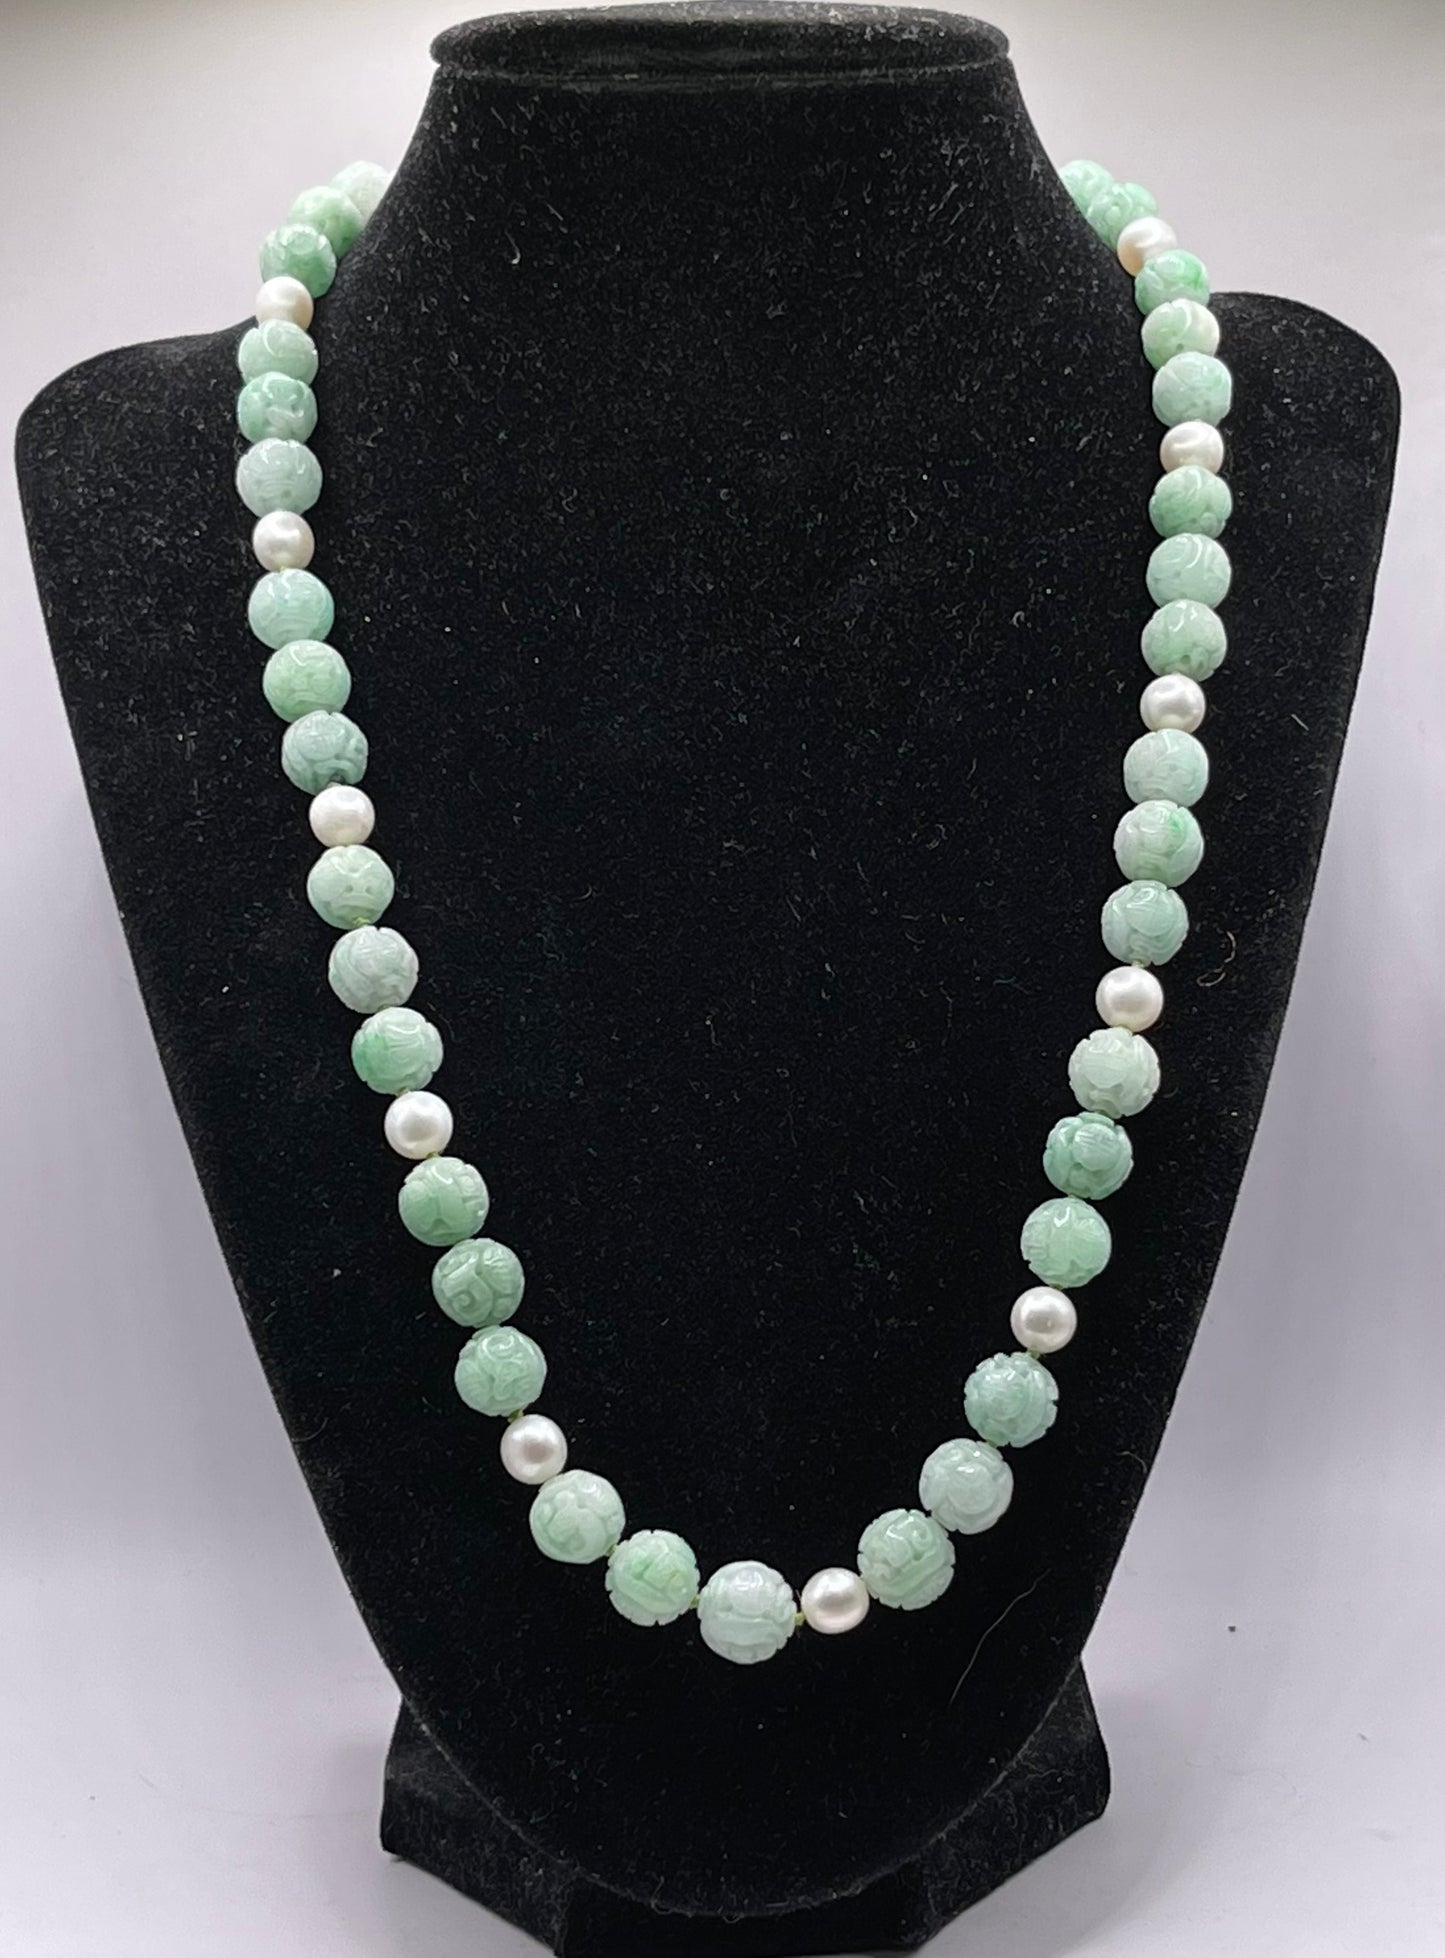 A necklace with vintage carved jade shou beads and pearls